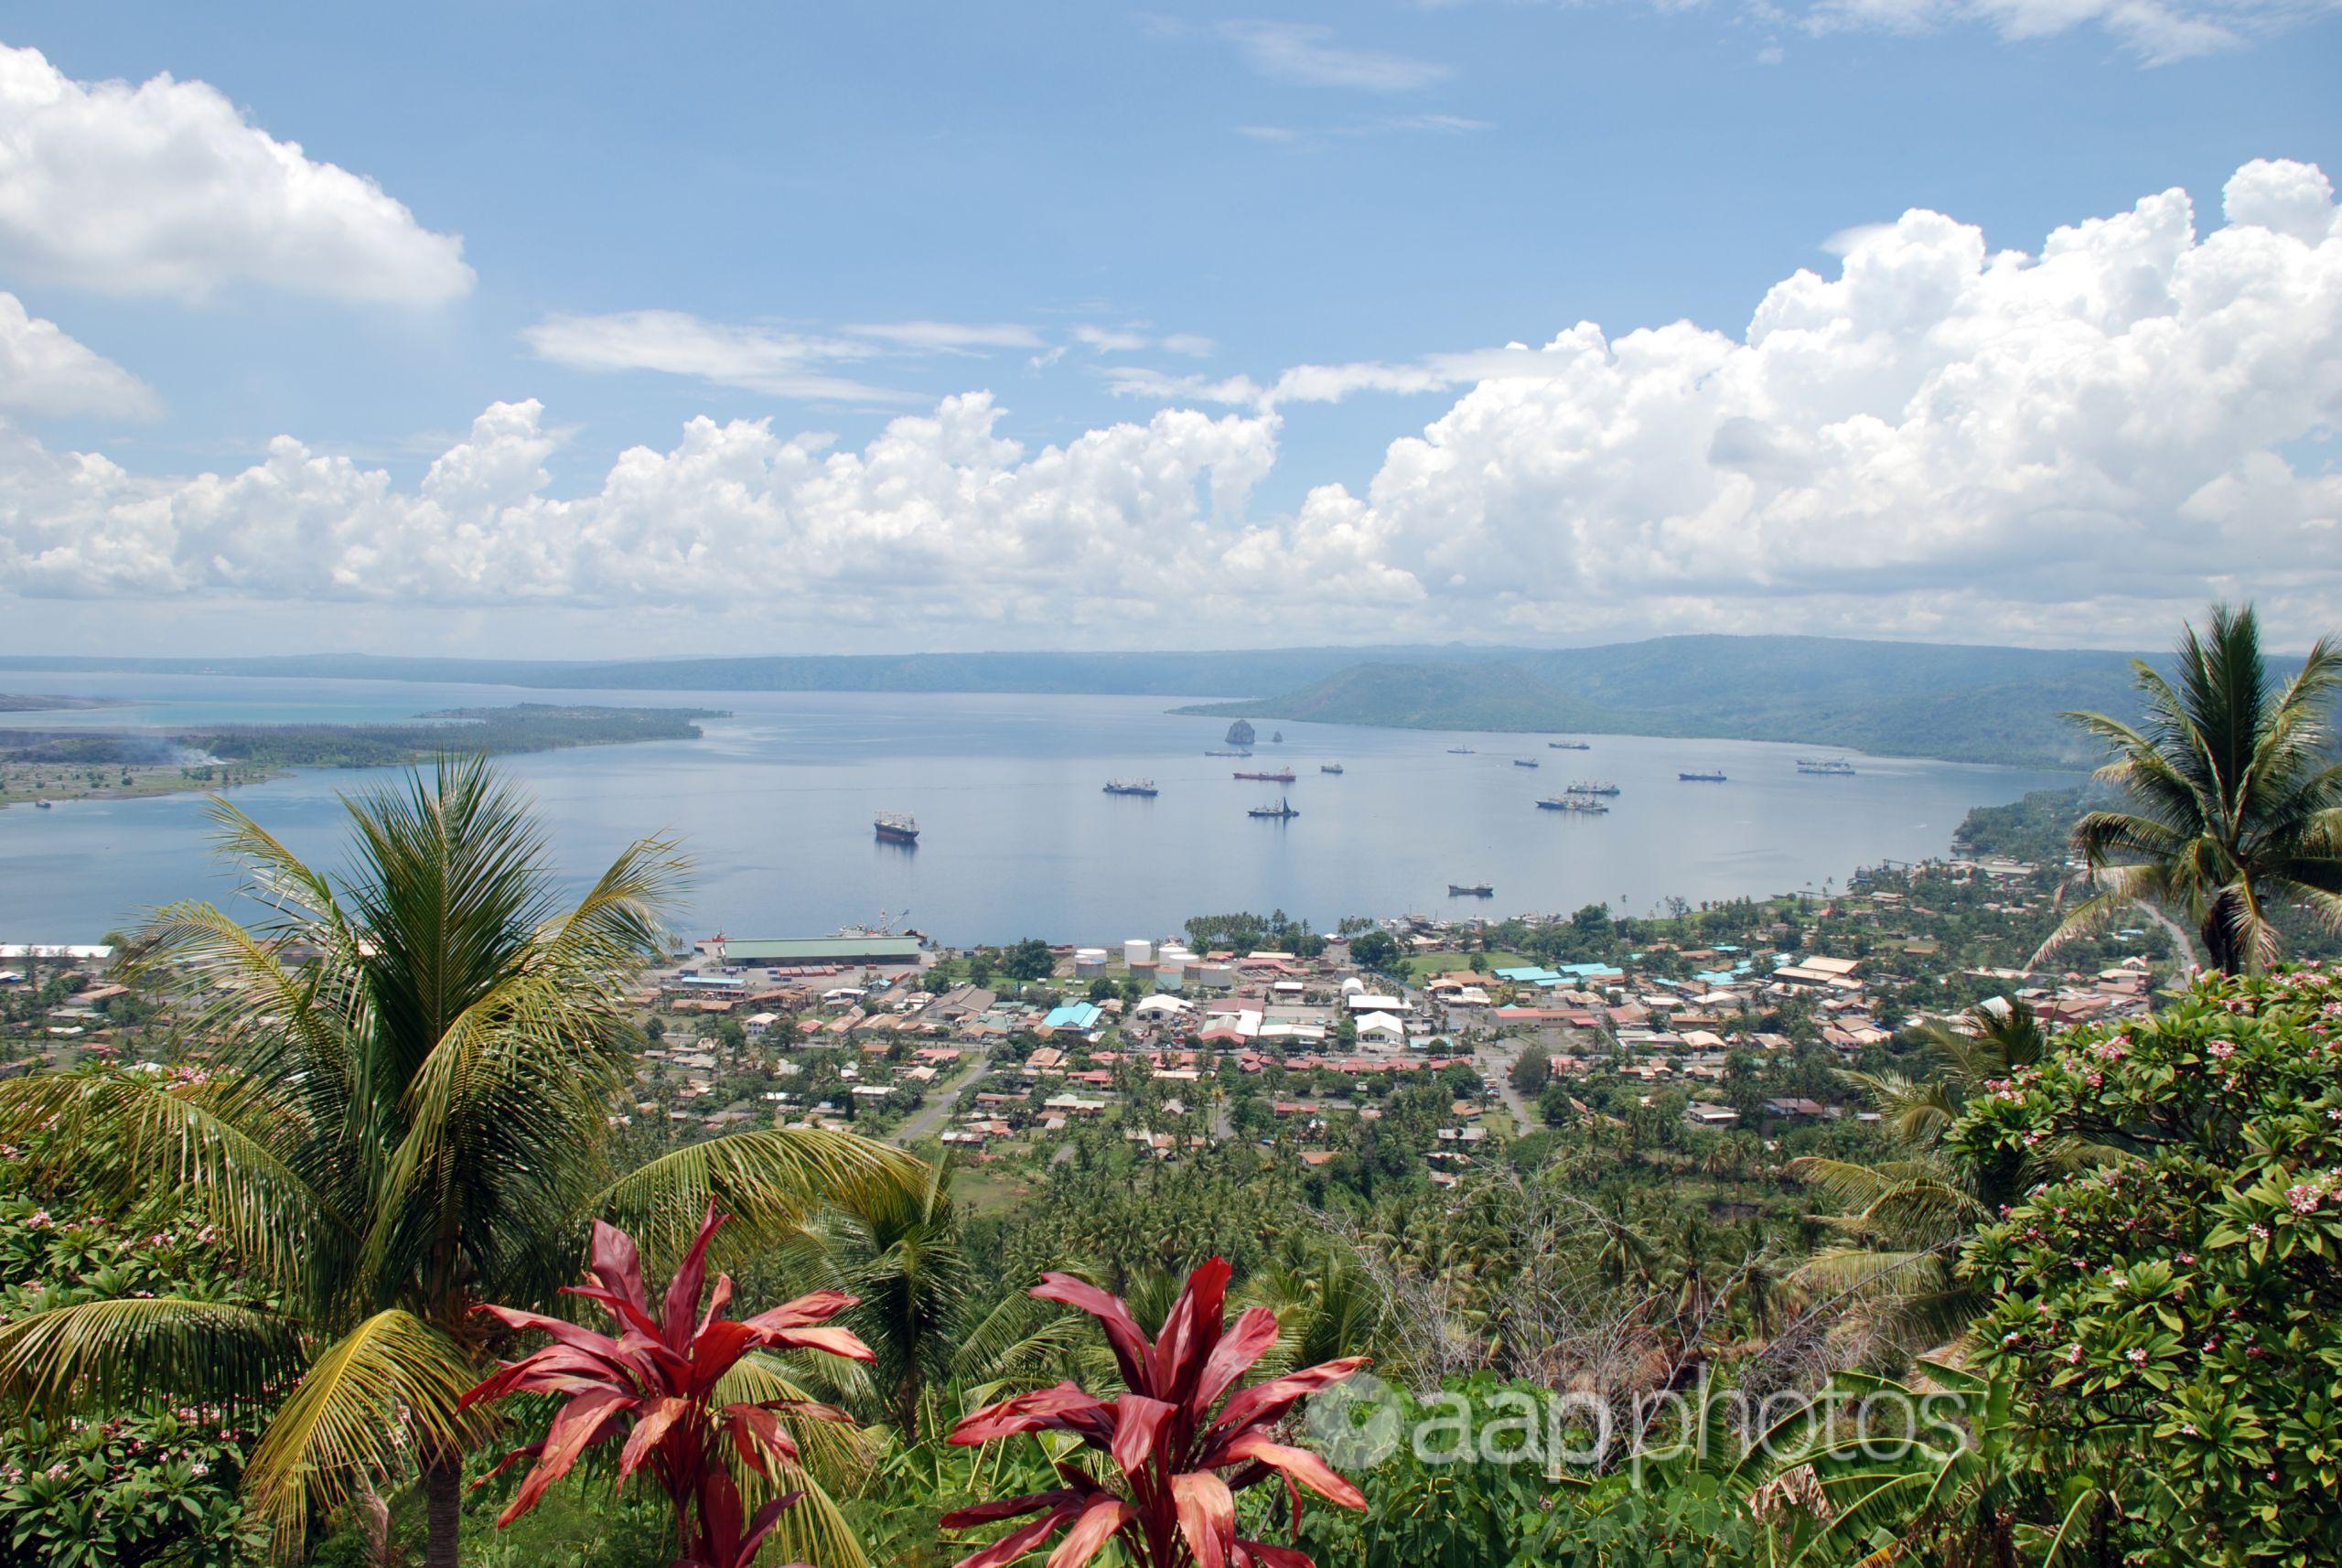 A view of the town of Rabaul, Papua New Guinea.